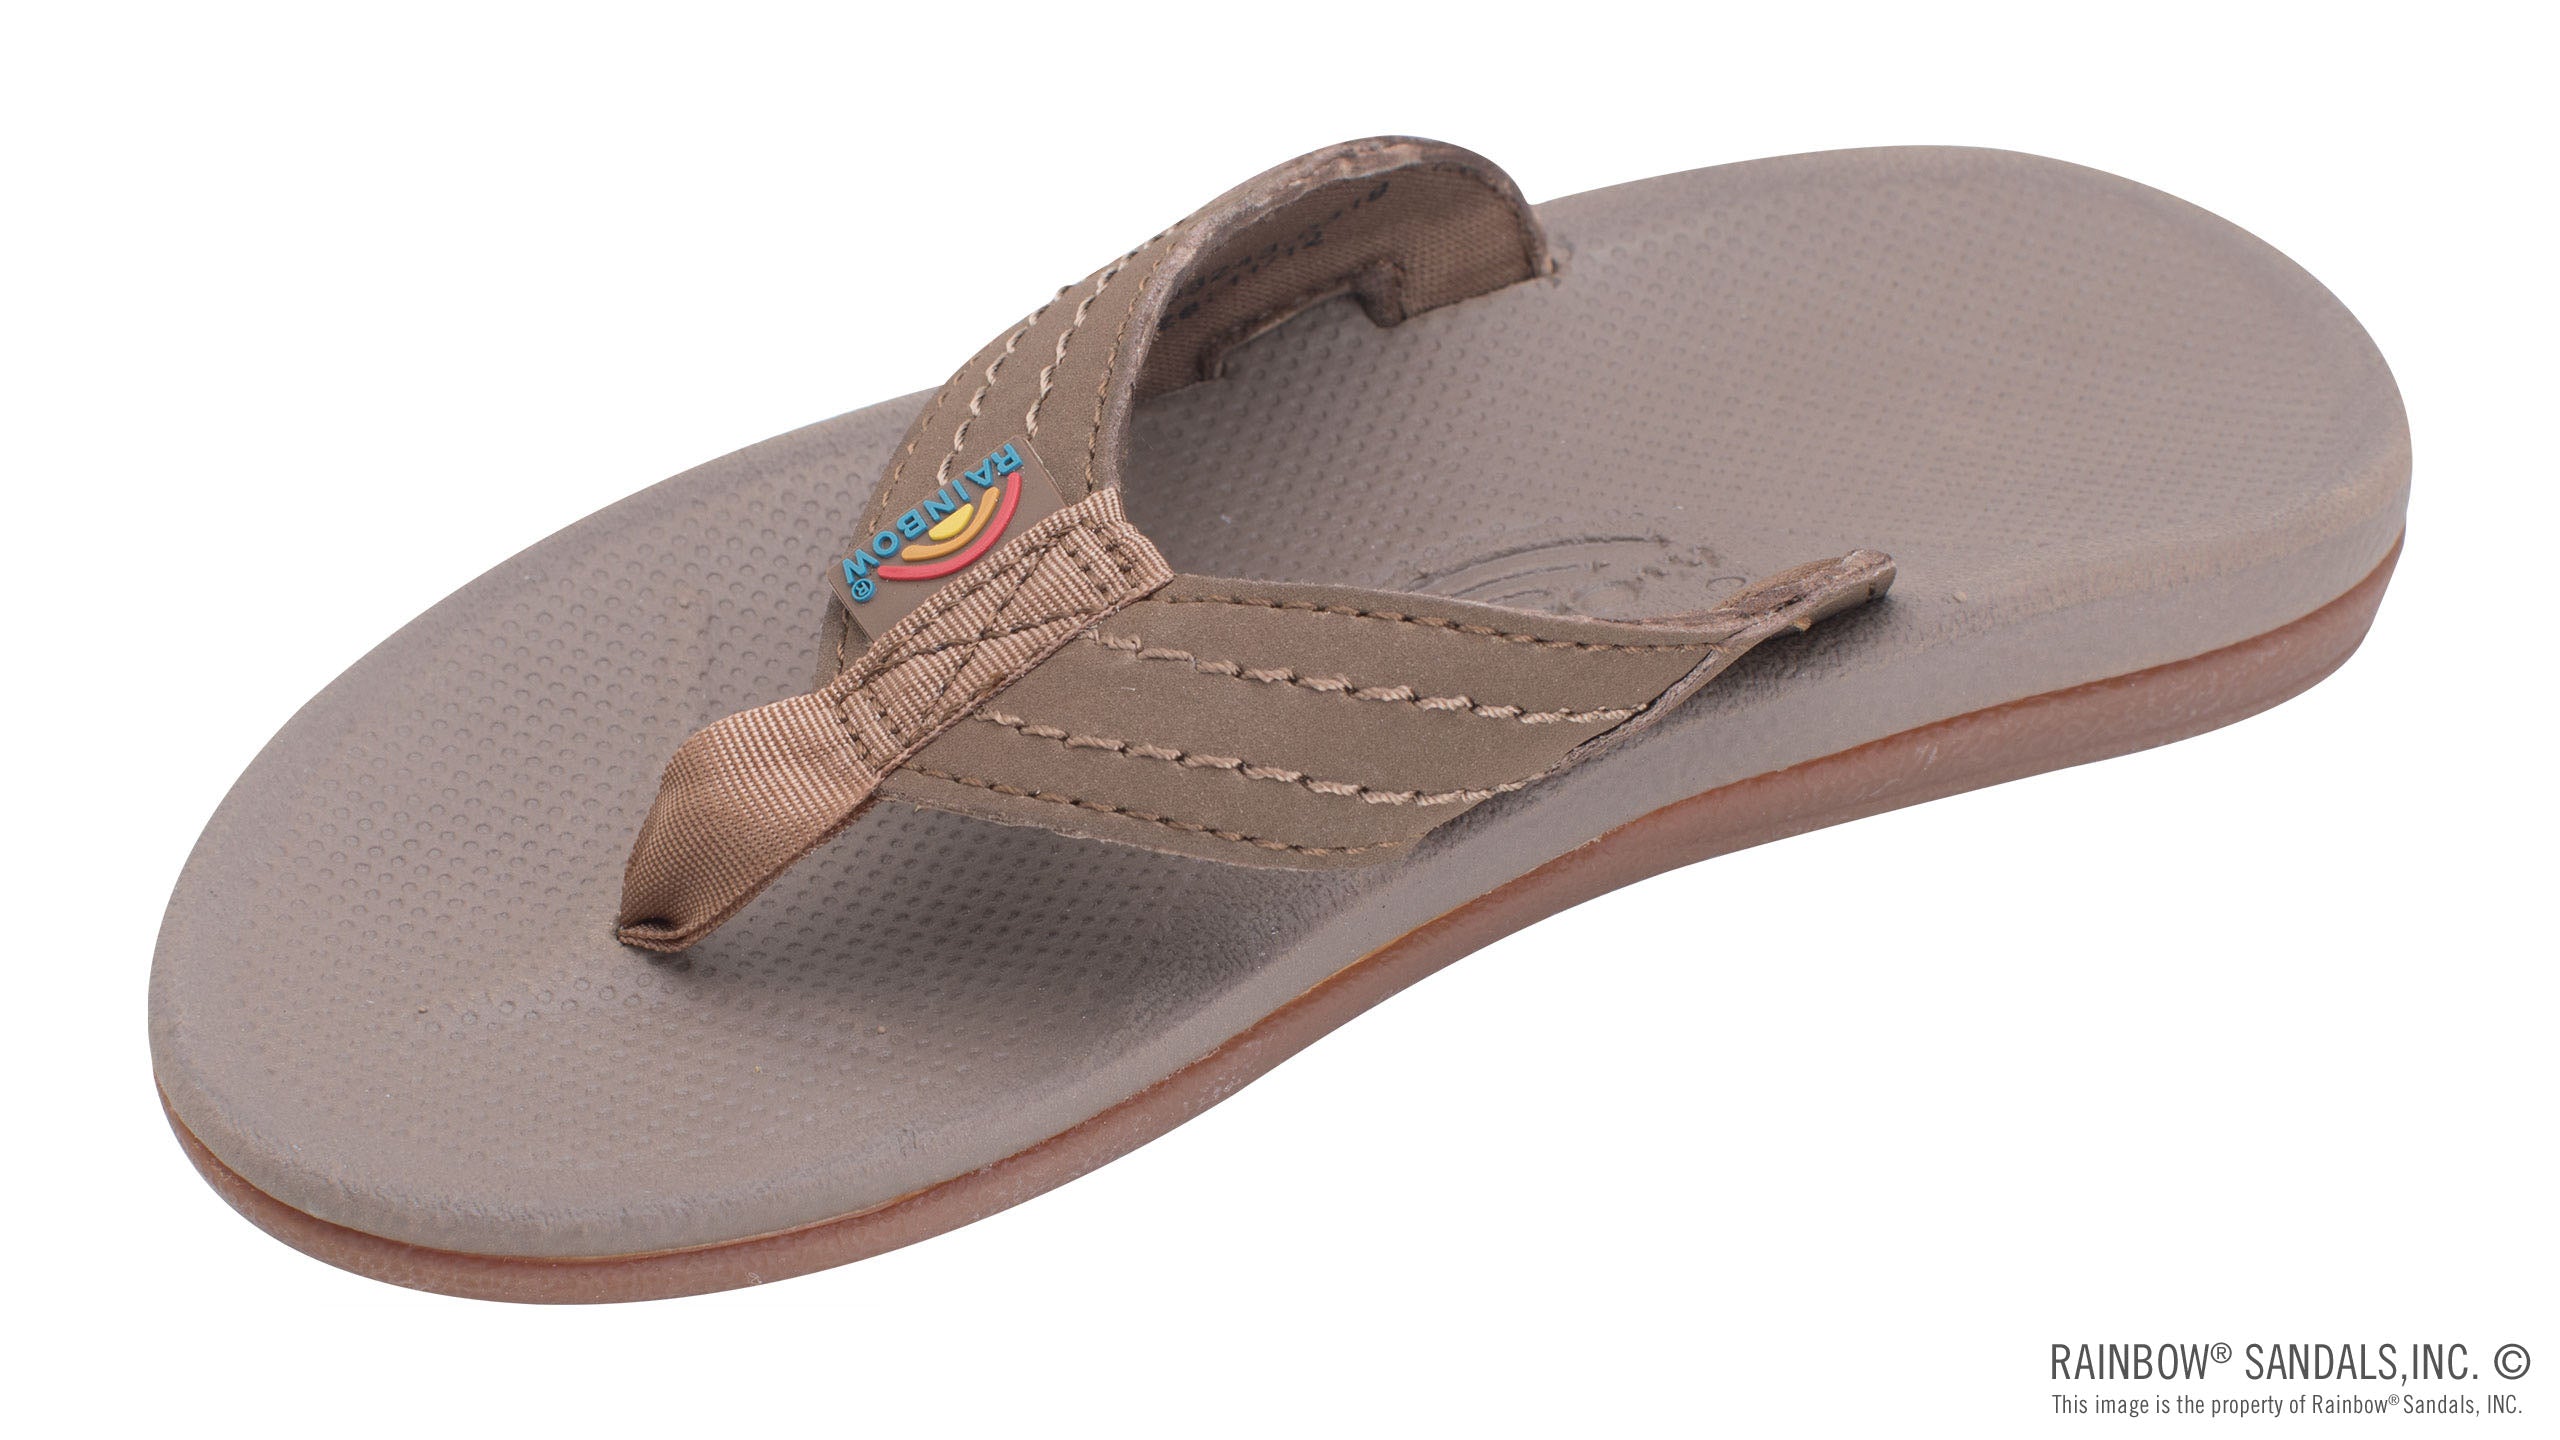 CHACO Z/1 KIDS IN MULTIPLE COLORS